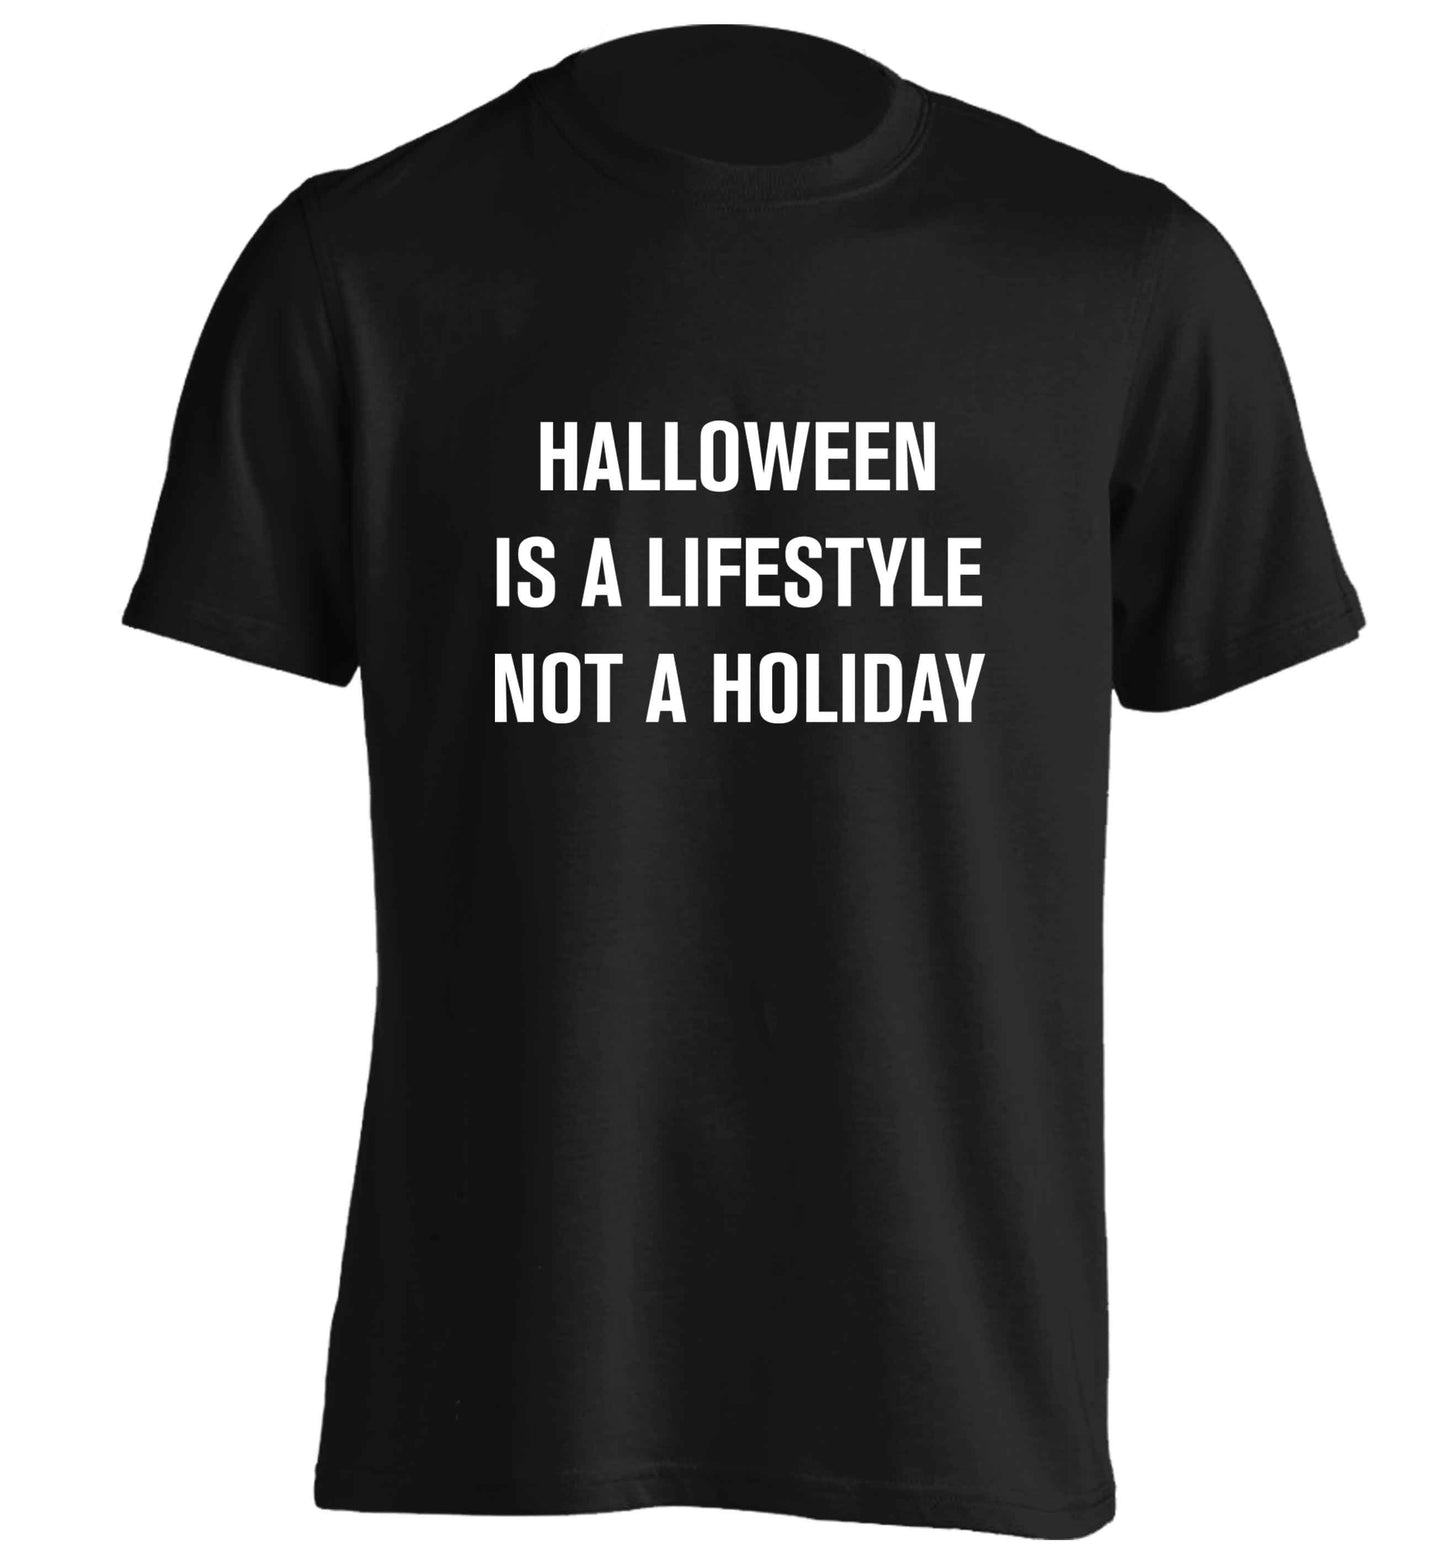 Halloween is a lifestyle not a holiday adults unisex black Tshirt 2XL